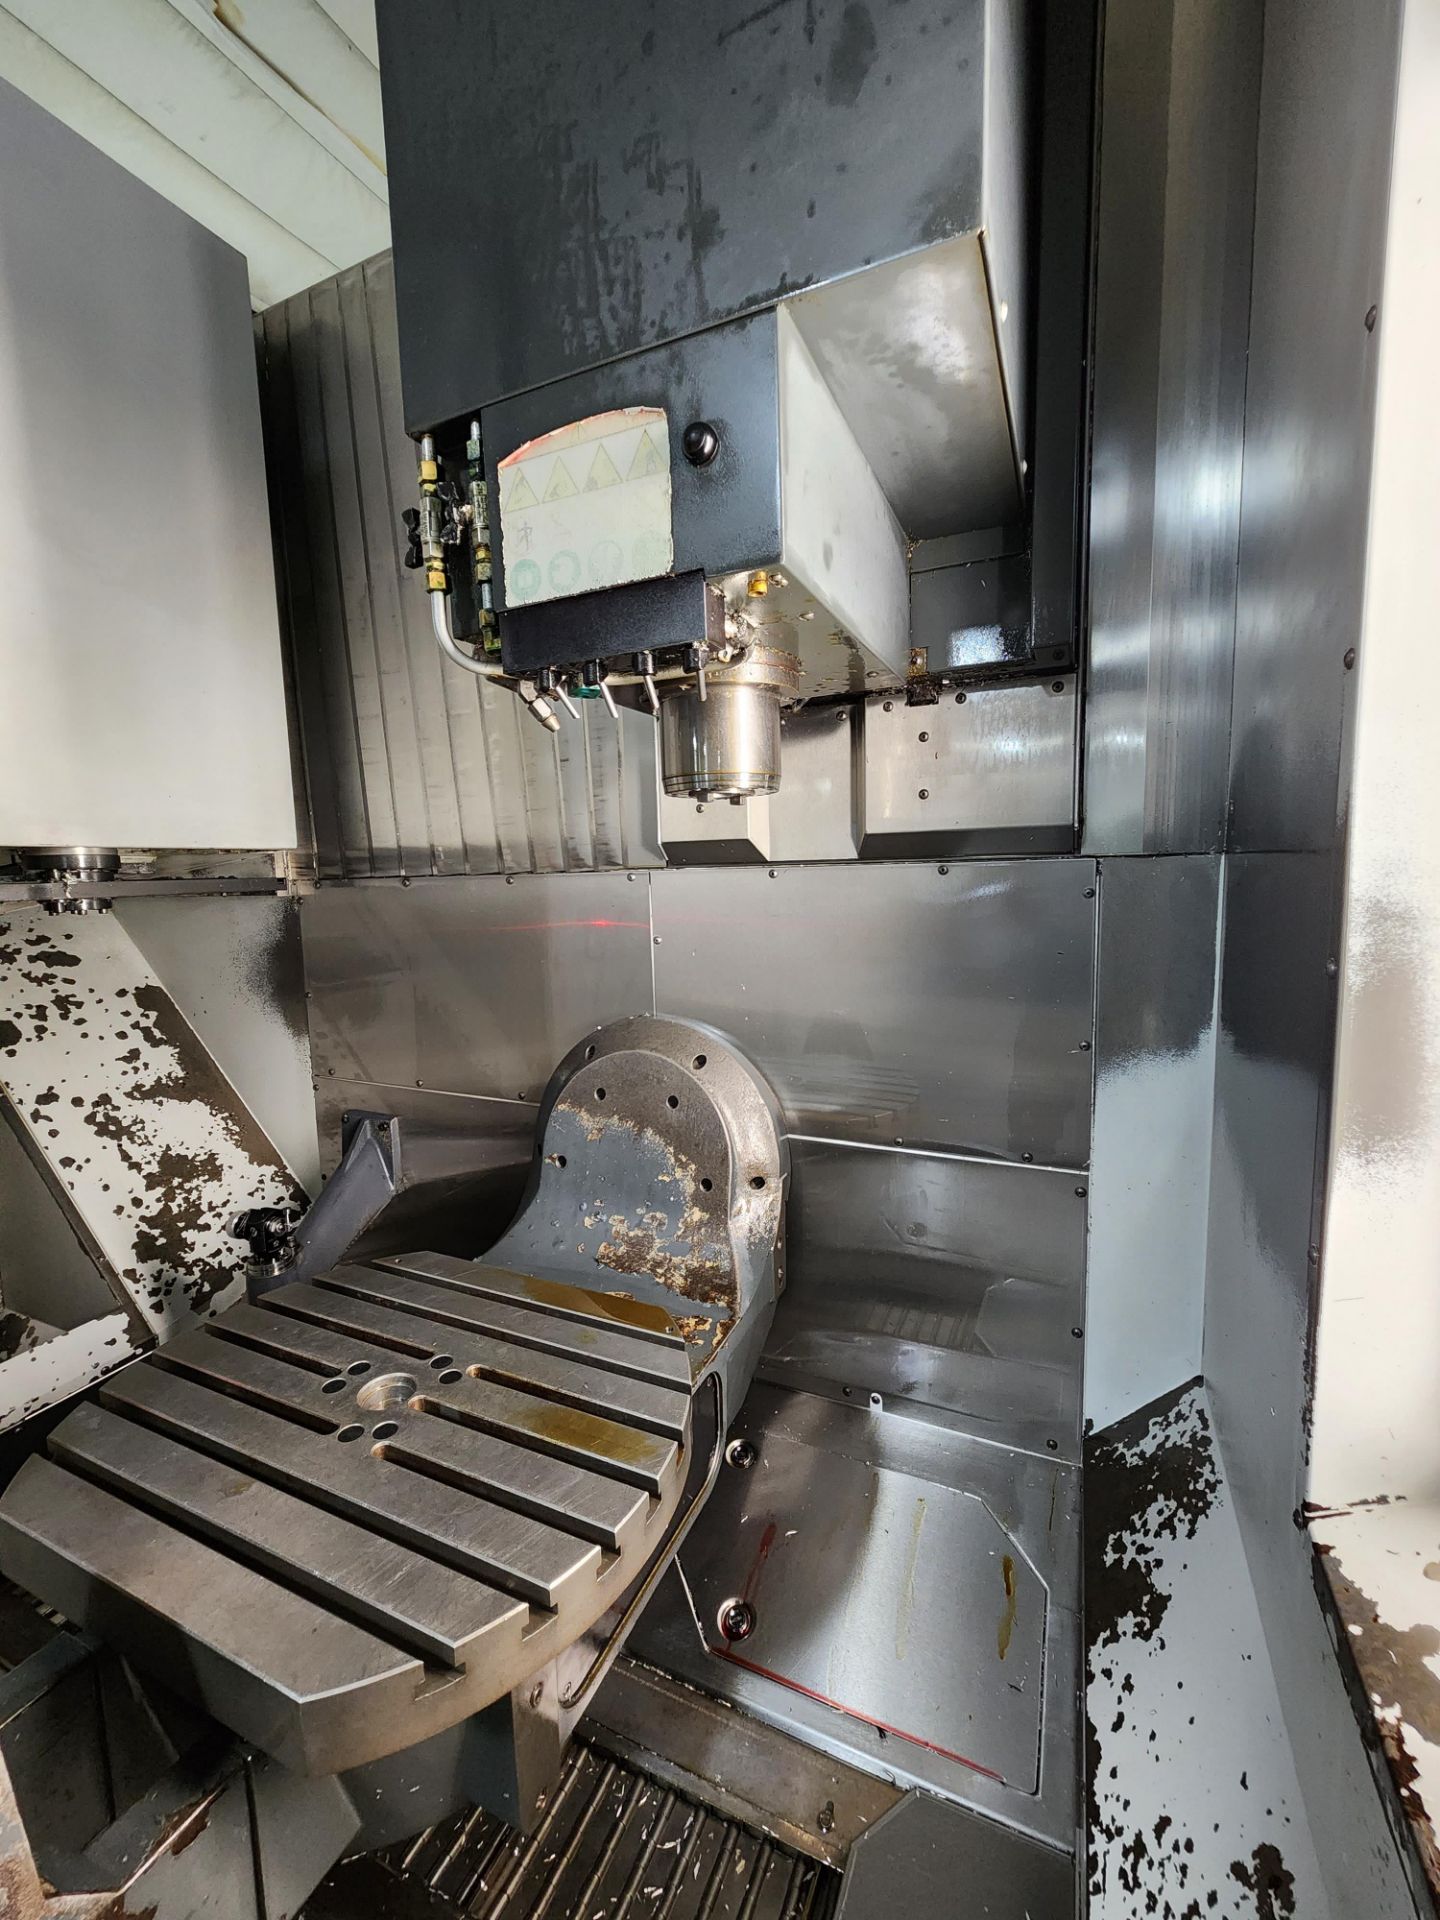 2016 HAAS UMC-750 5-Axis 12,000 rpm CNC Vertical Machining Center - Image 6 of 16